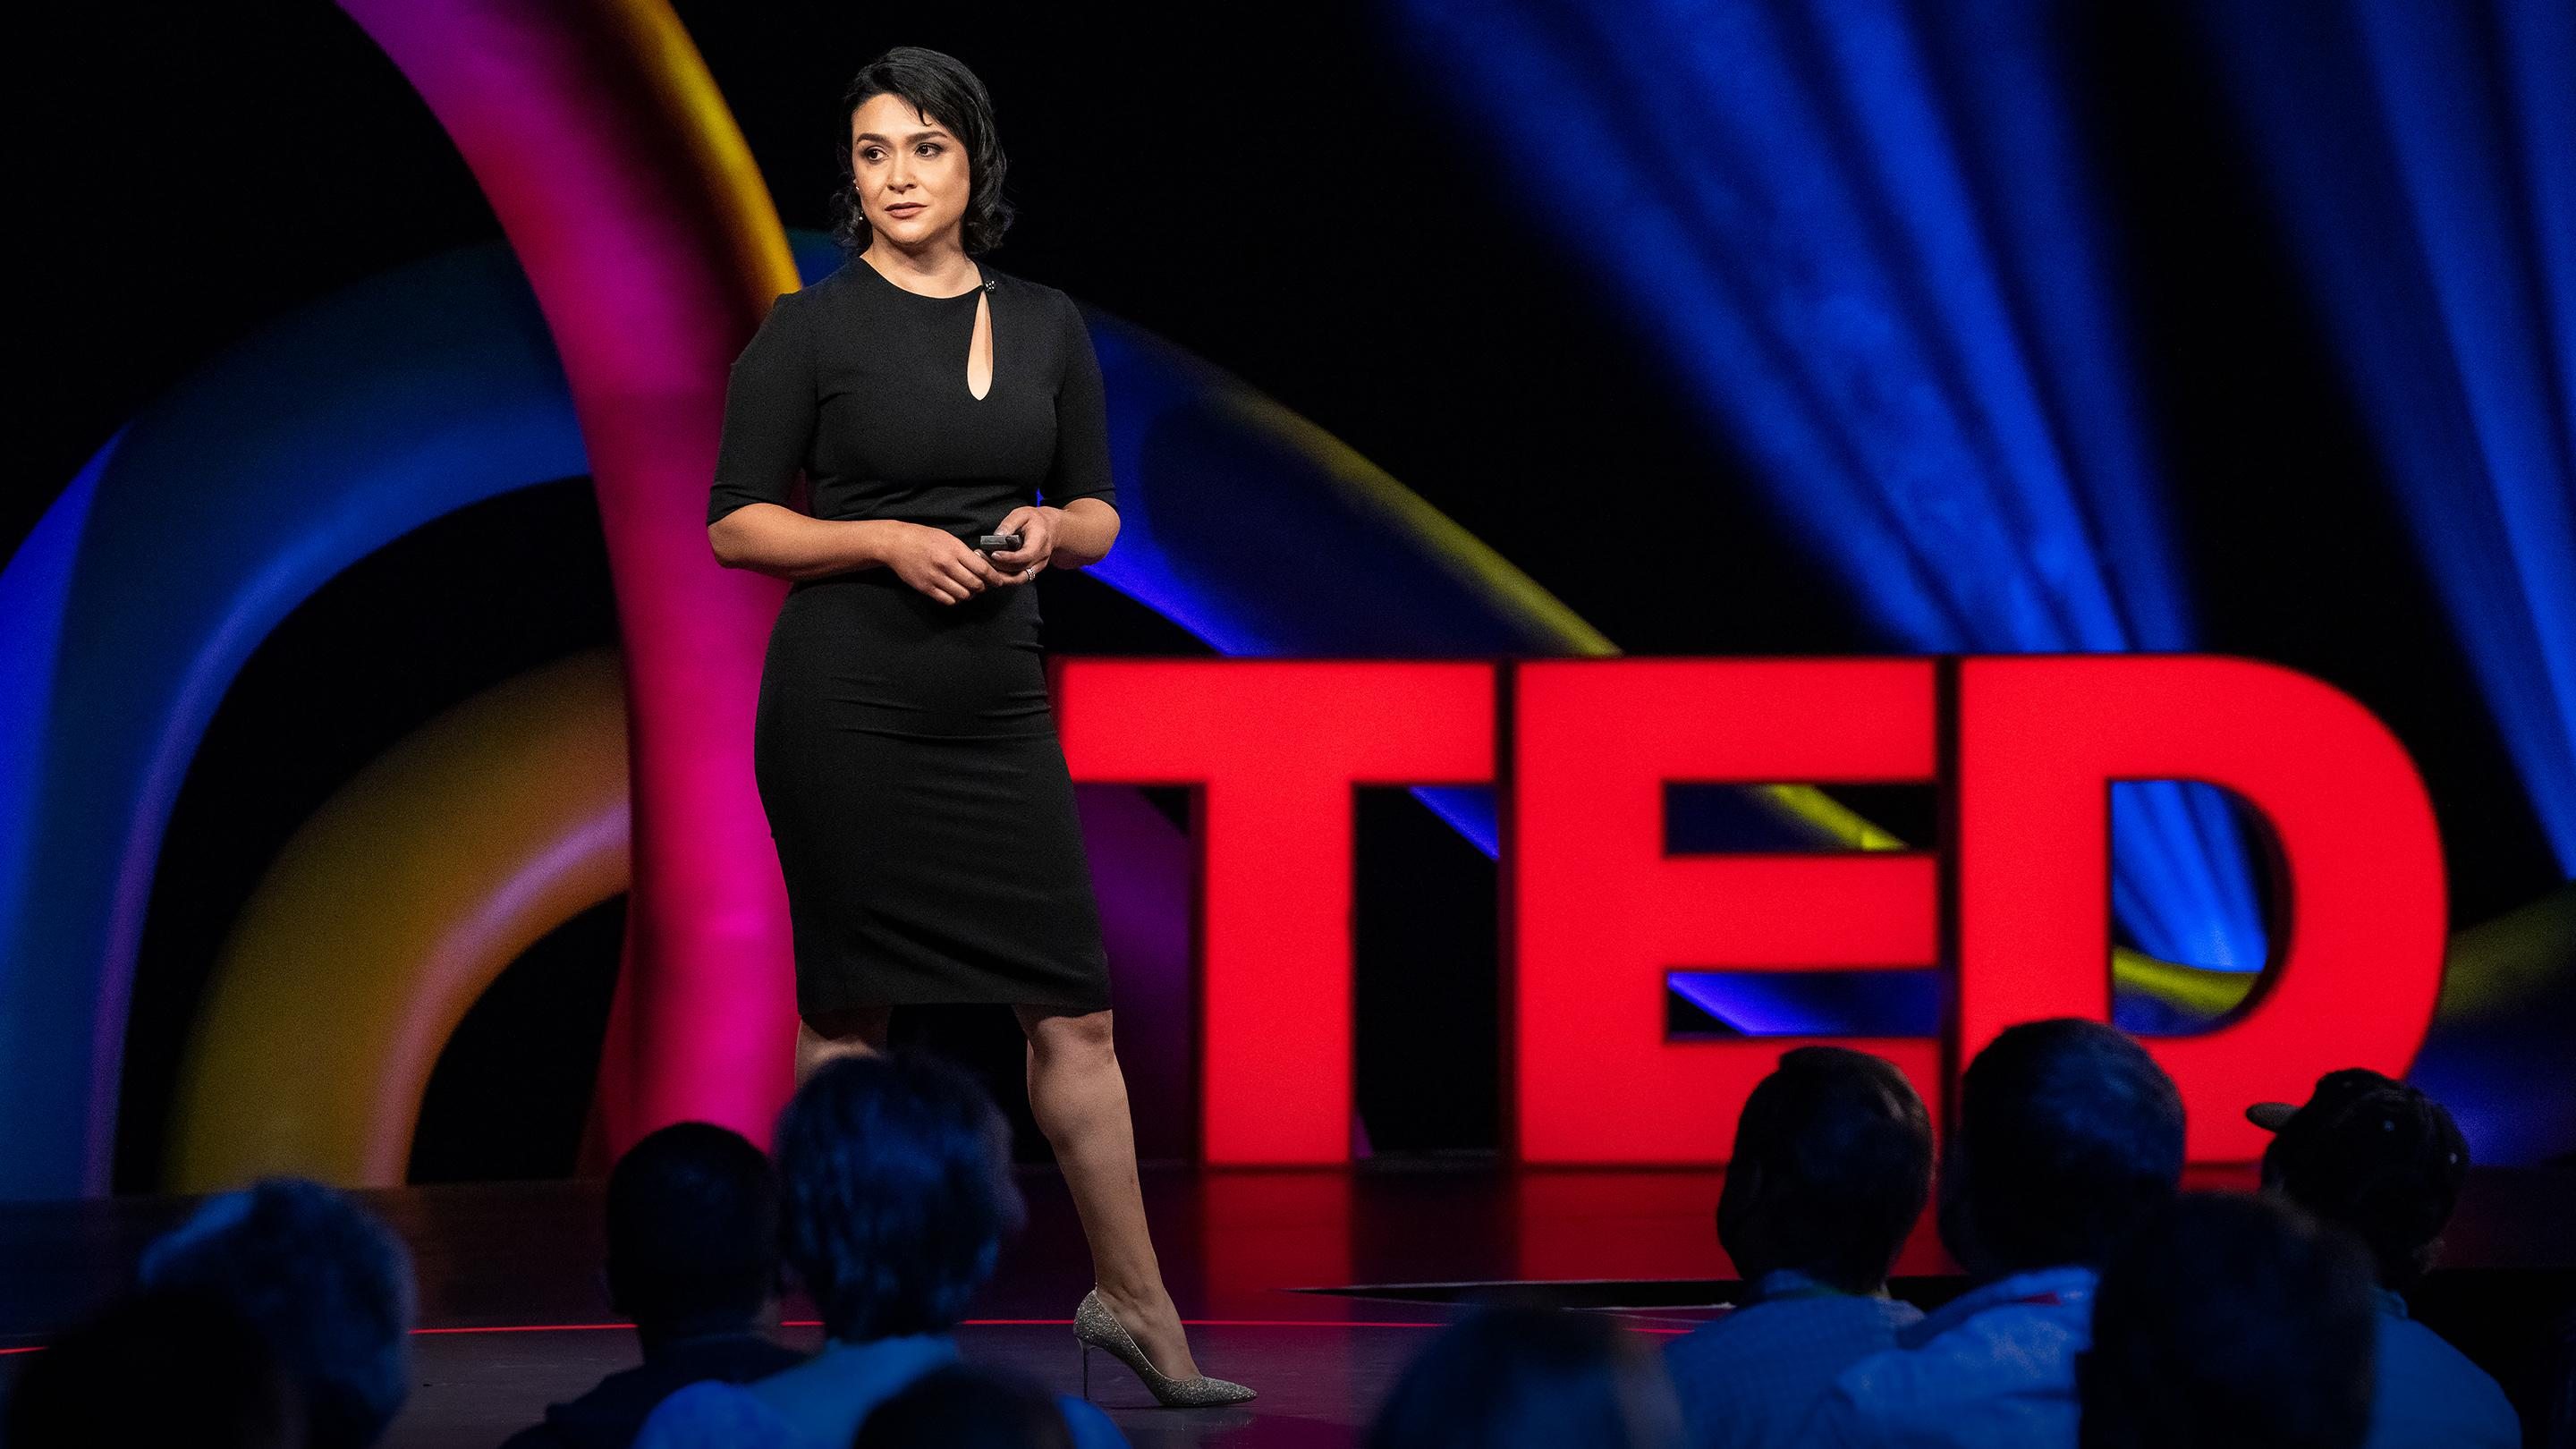 An idea from TED by Betül Kaçar entitled We could kick-start life on another planet. Should we?